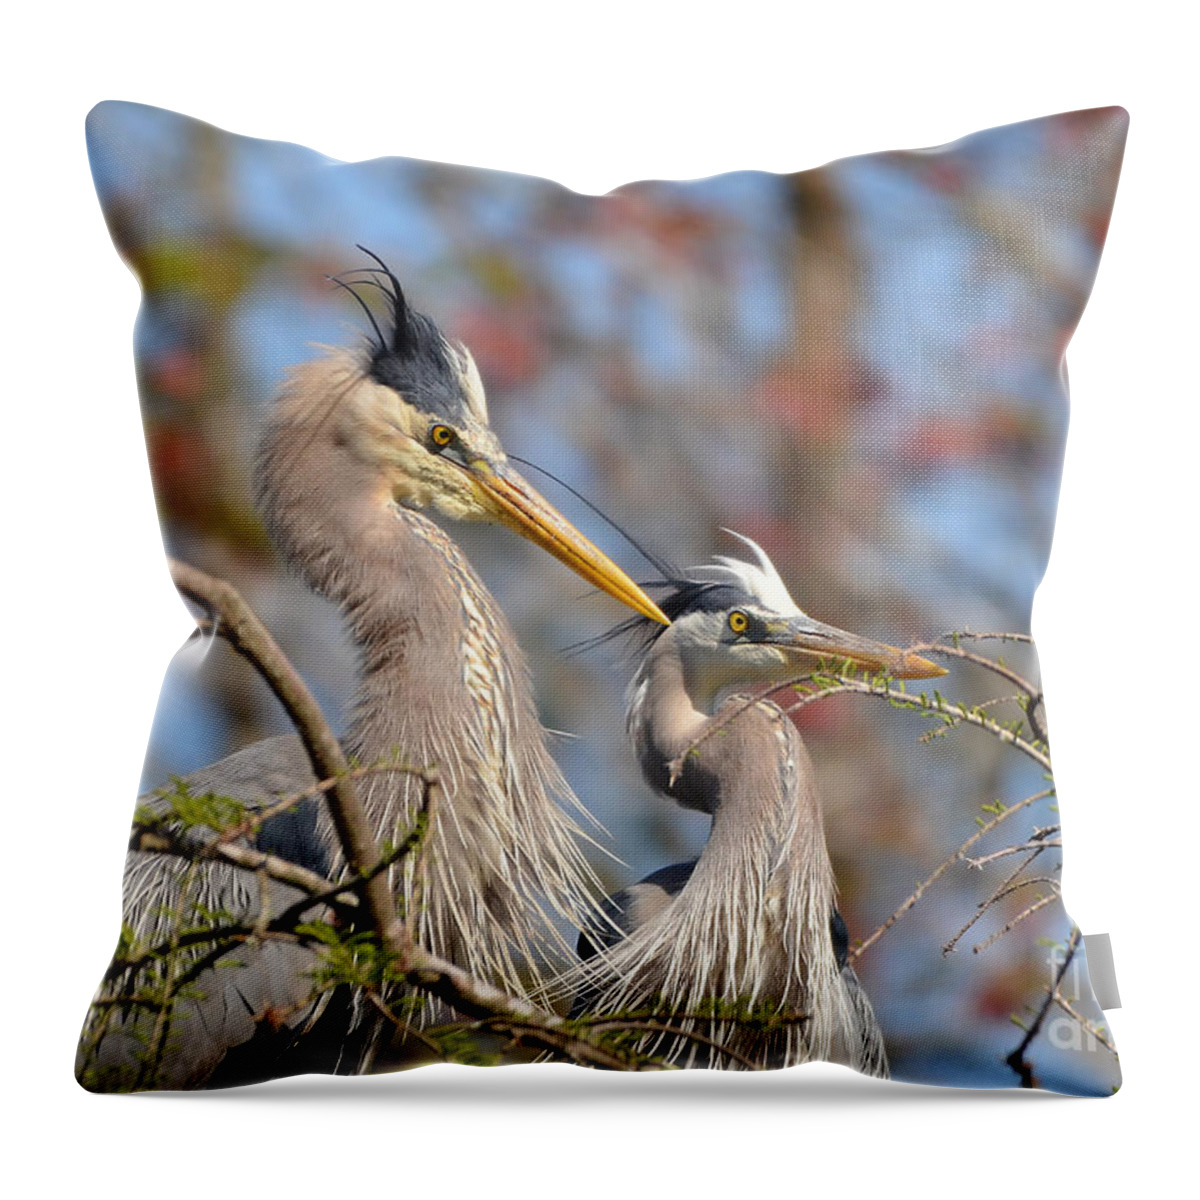 Heron Throw Pillow featuring the photograph Mr. And Mrs. by Kathy Baccari